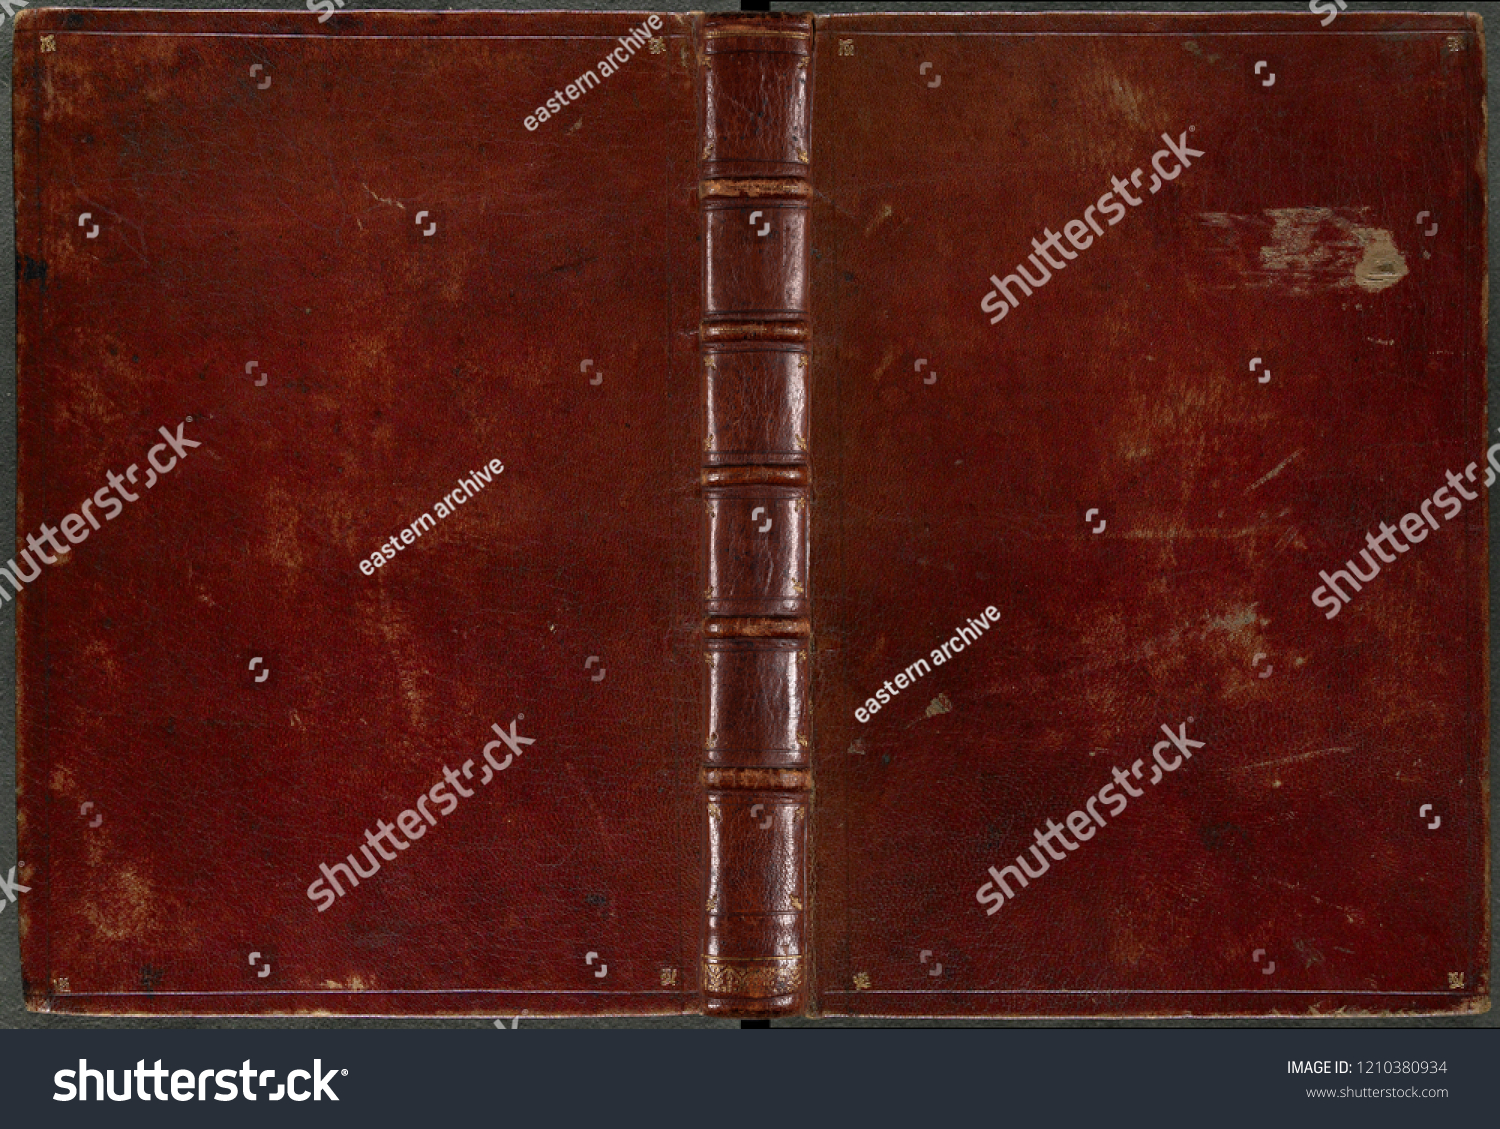 Vintage leather book cover #1210380934